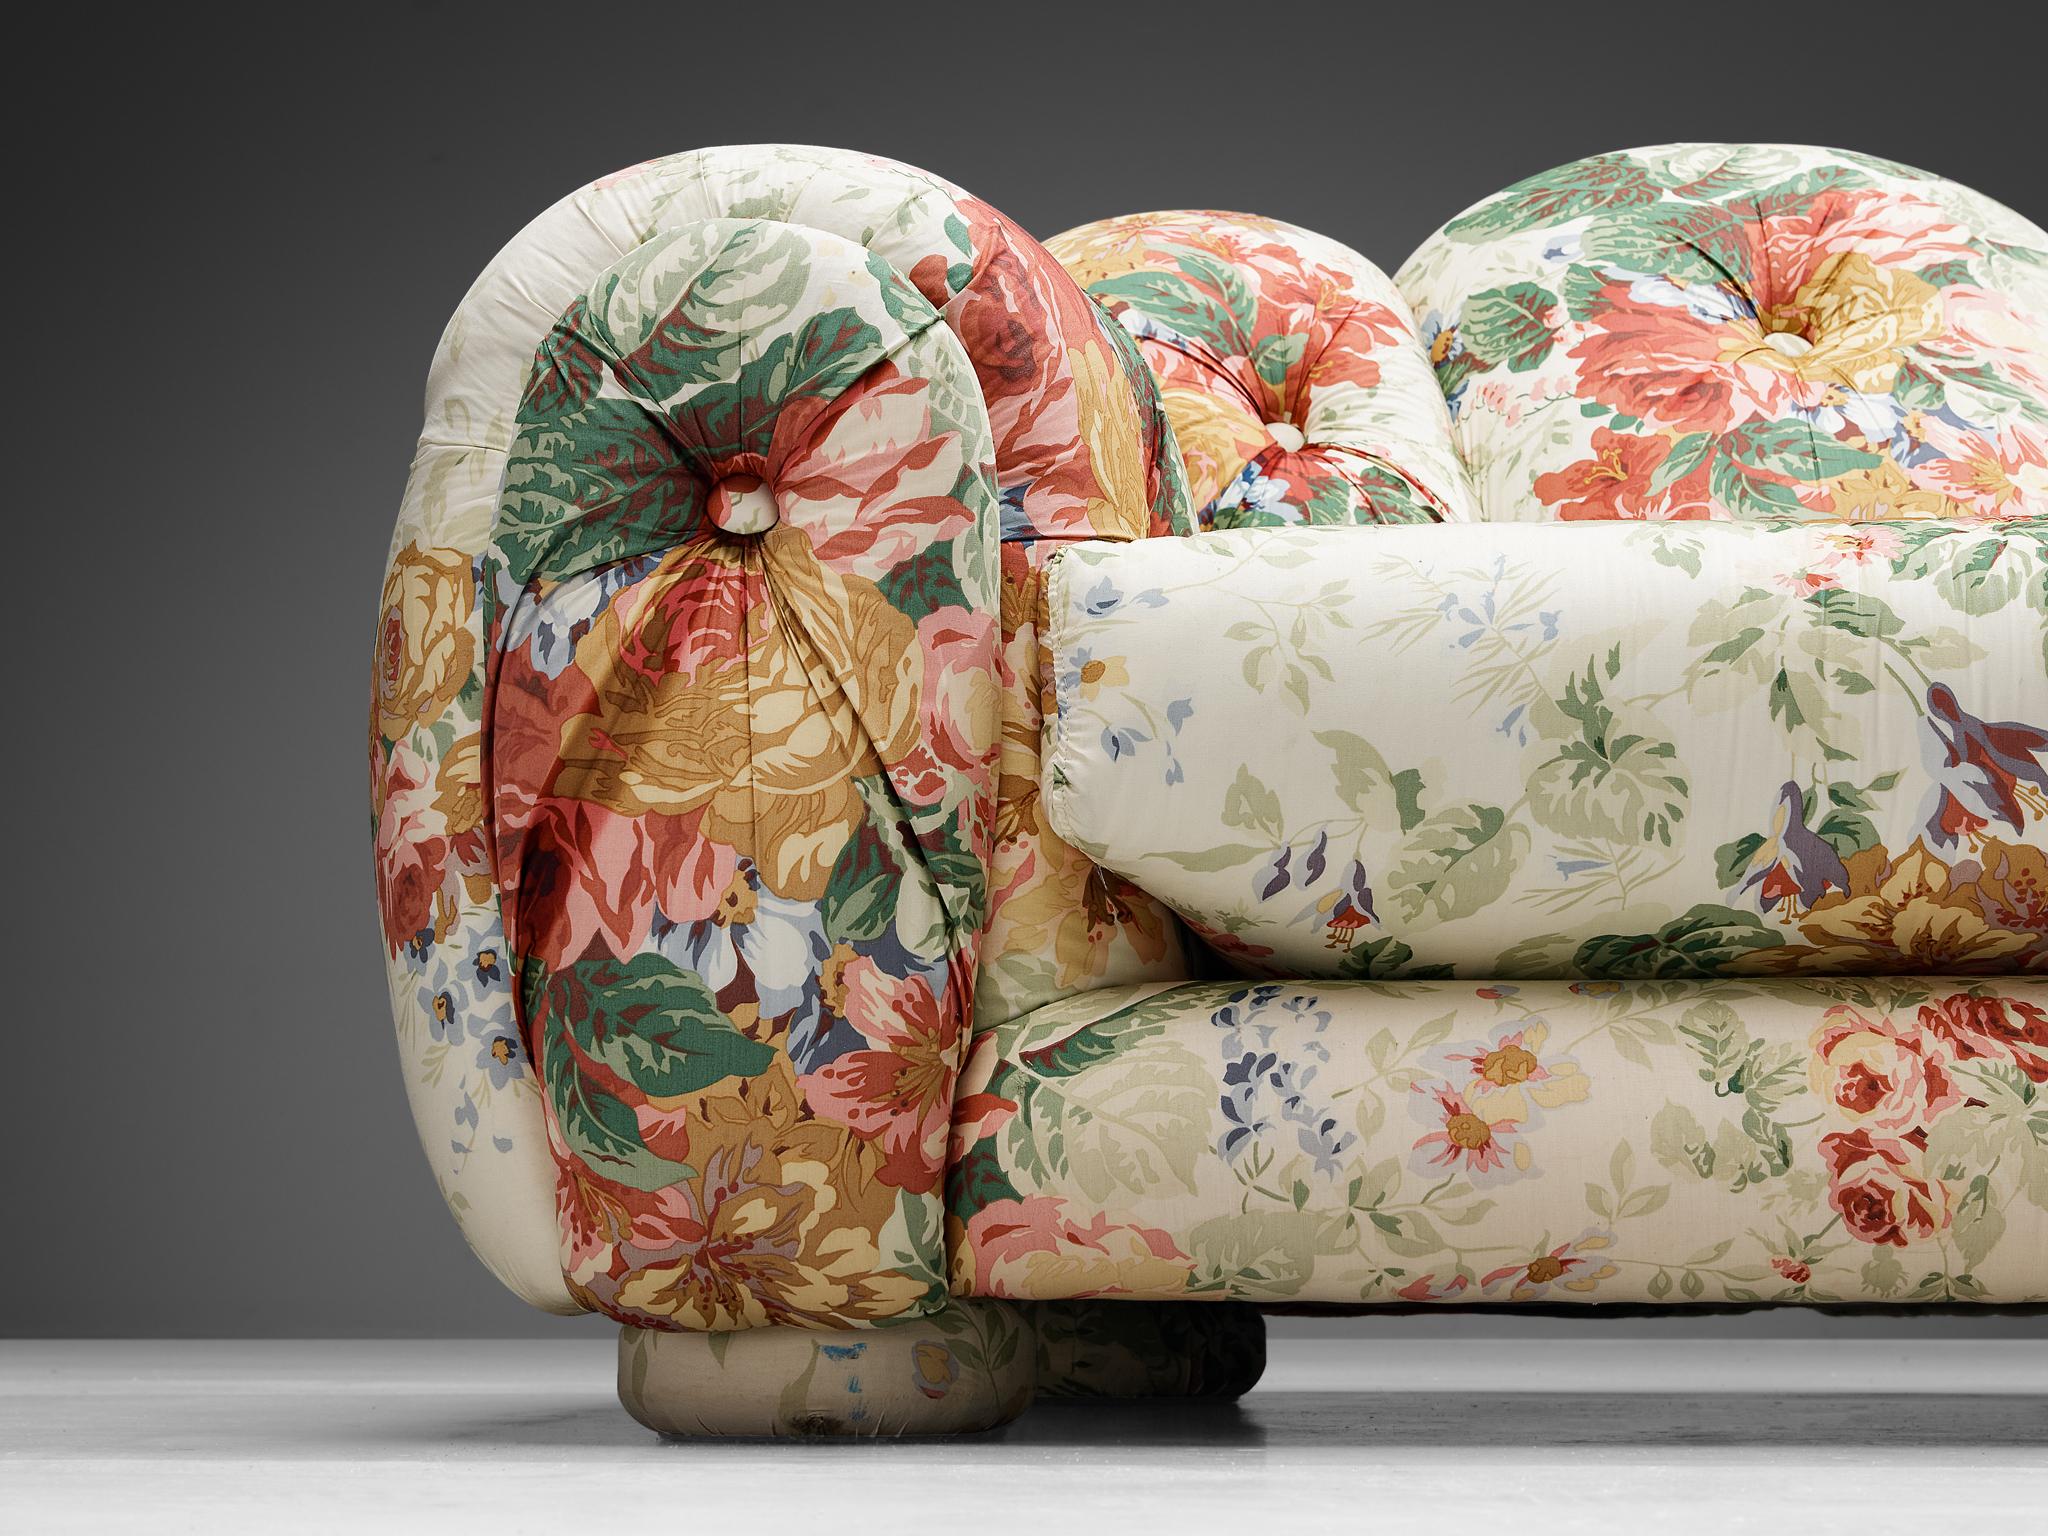 Italian Vivai Del Sud 'Superstar' Lounge Chair in Floral Upholstery